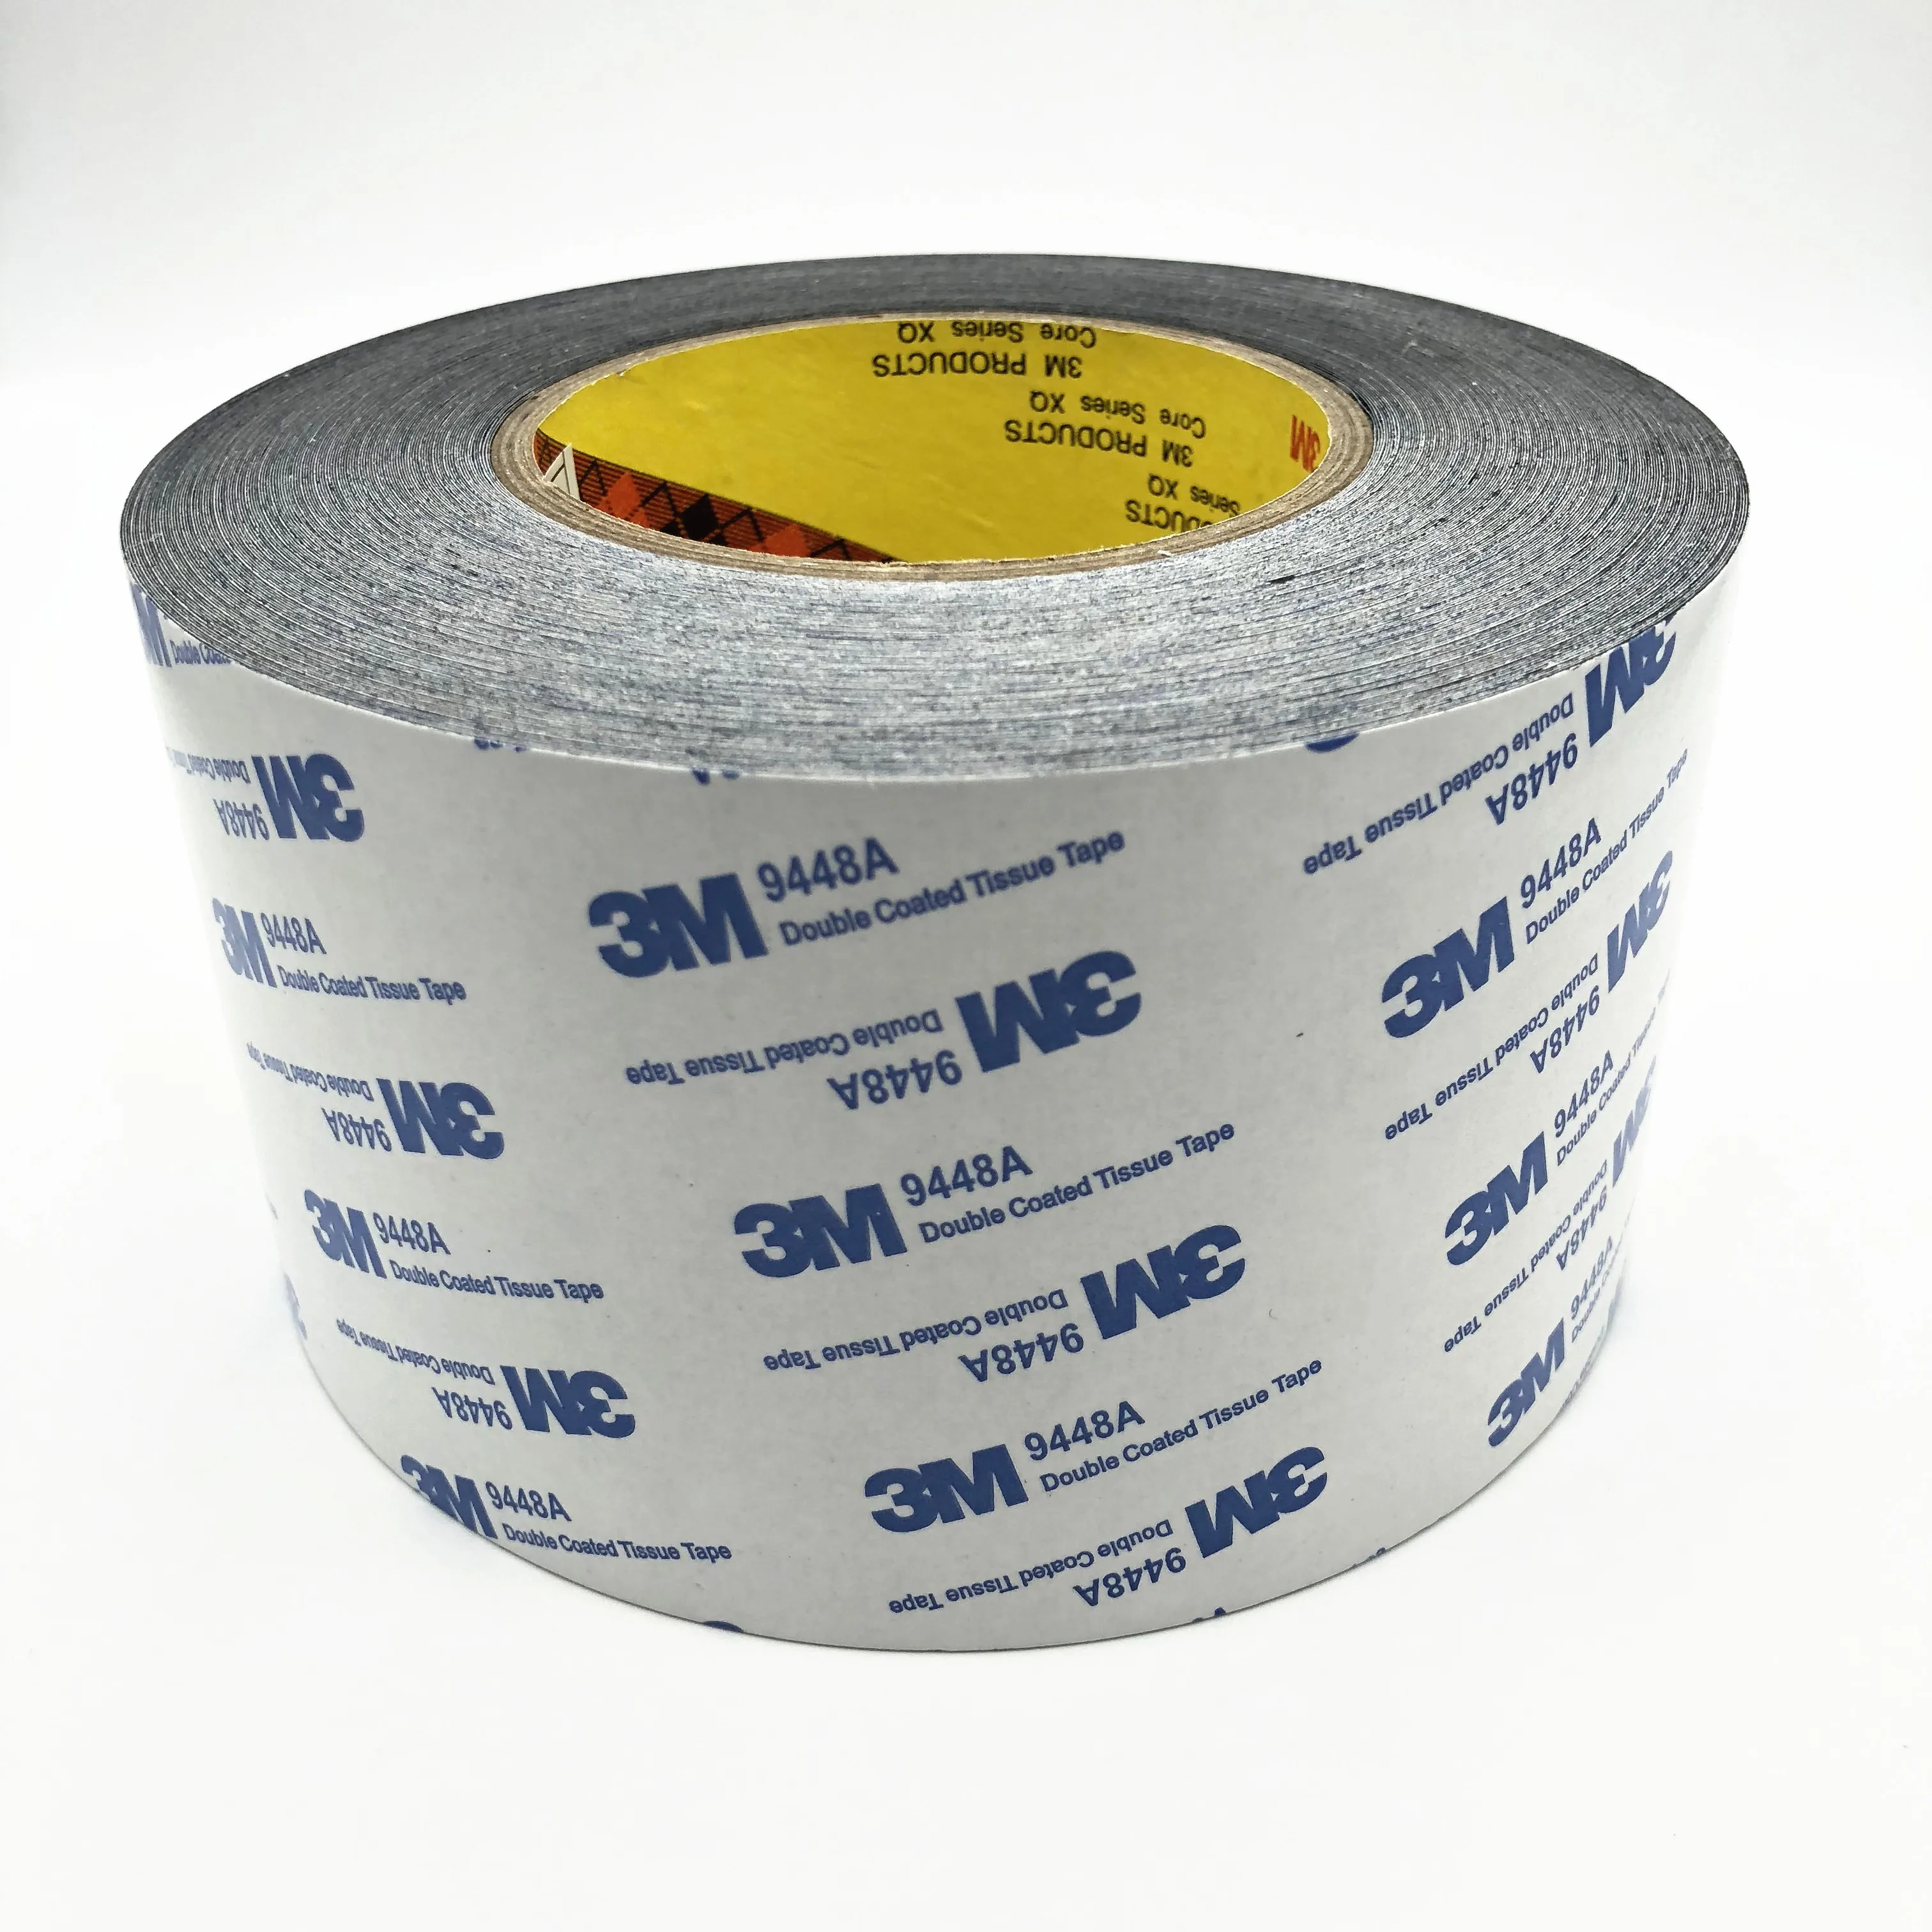 3m tape products